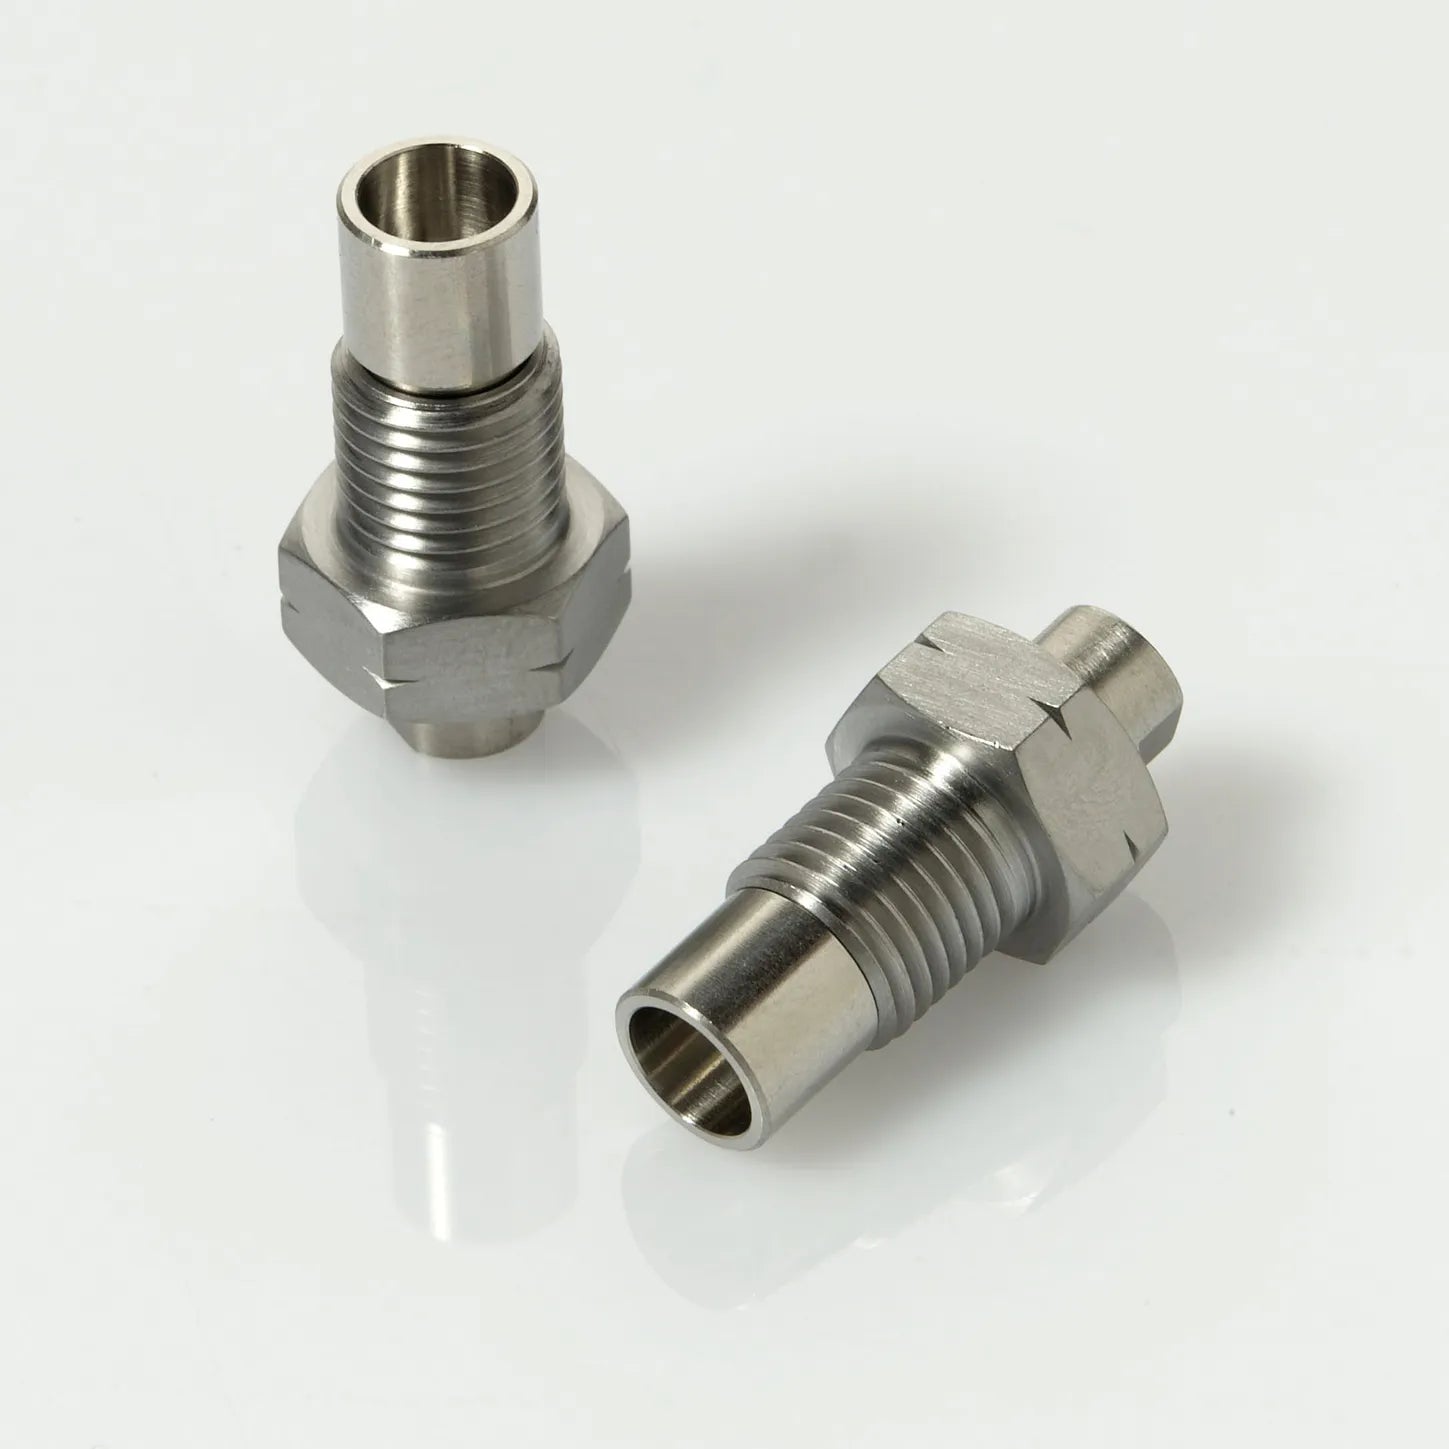 Cartridge Check Valve Housing, 2/pk, Comparable to Waters # 700002332